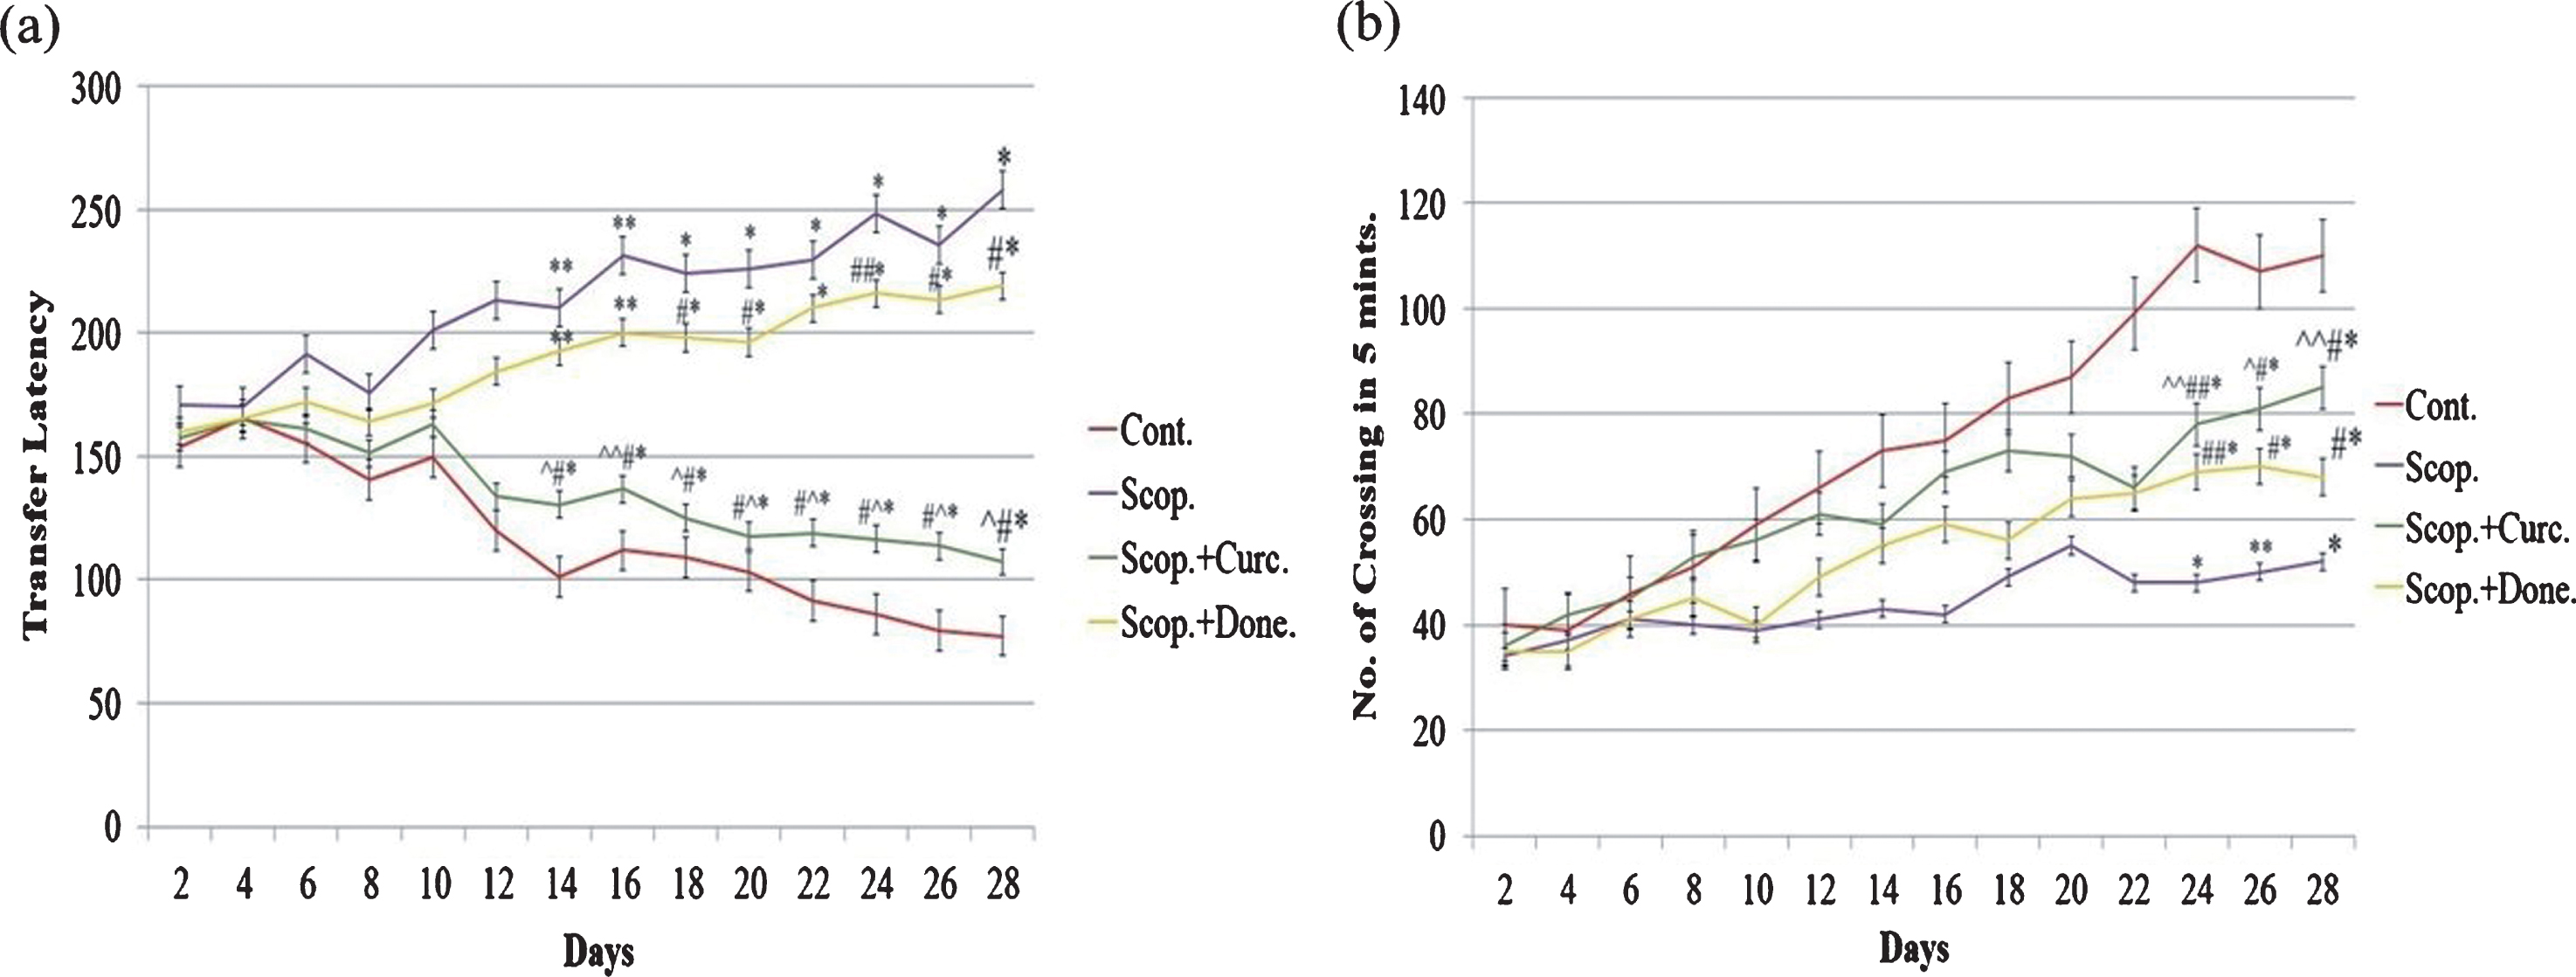 Behavioral studies of animals. (a) Rectangular maze test and (b) locomotor activity test of AD rats and following treatment. The assay was performed in triplicate. Data expressed as mean±S.E. (*p < 0.001, **p < 0.01, and ***p < 0.05 versus saline-treated group; #p < 0.001, ##p < 0.01, and # # #p < 0.05 versus scopolamine-induced AD rats, ∧p < 0.001, ∧∧p < 0.01, and ∧∧∧p < 0.05 versus scopolamine-donepezil rats. n = 8). Cont., control; Scop., scopolamine; Done., donepezil; Curc., curcumin.